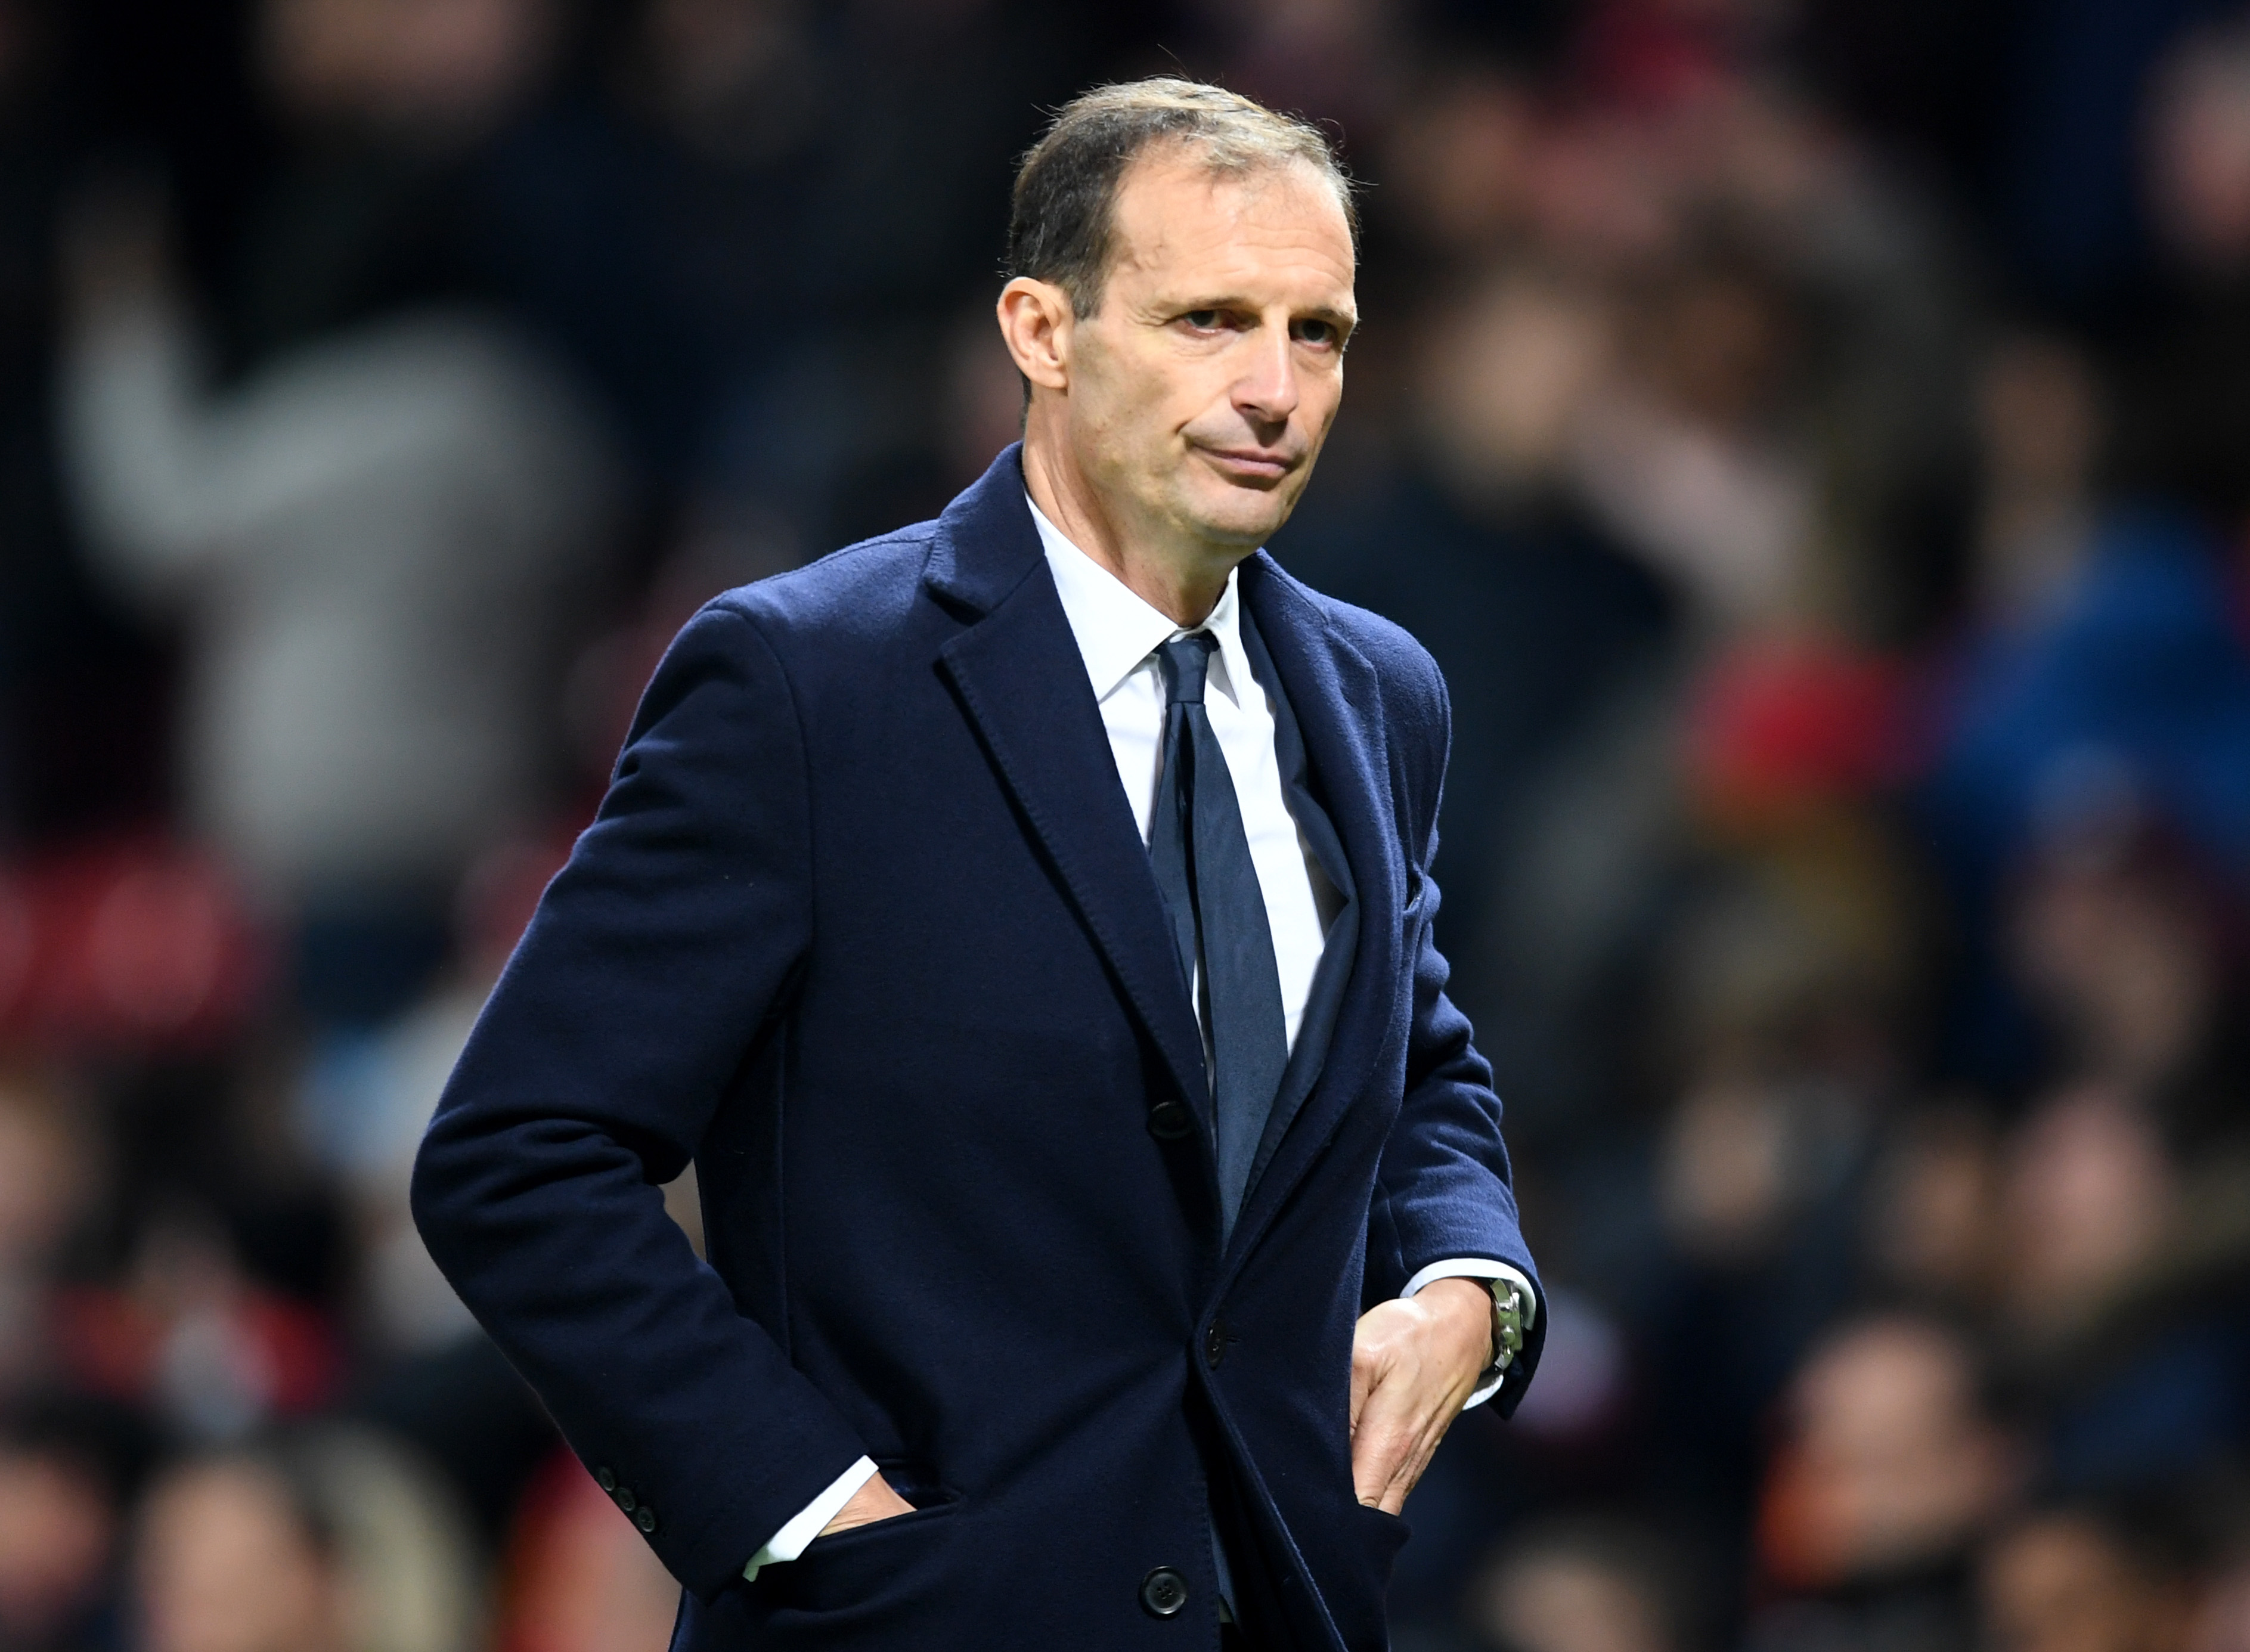 MANCHESTER, ENGLAND - OCTOBER 23: Massimiliano Allegri, Manager of Juventus reacts following thethe Group H match of the UEFA Champions League between Manchester United and Juventus at Old Trafford on October 23, 2018 in Manchester, United Kingdom.  (Photo by Michael Regan/Getty Images)